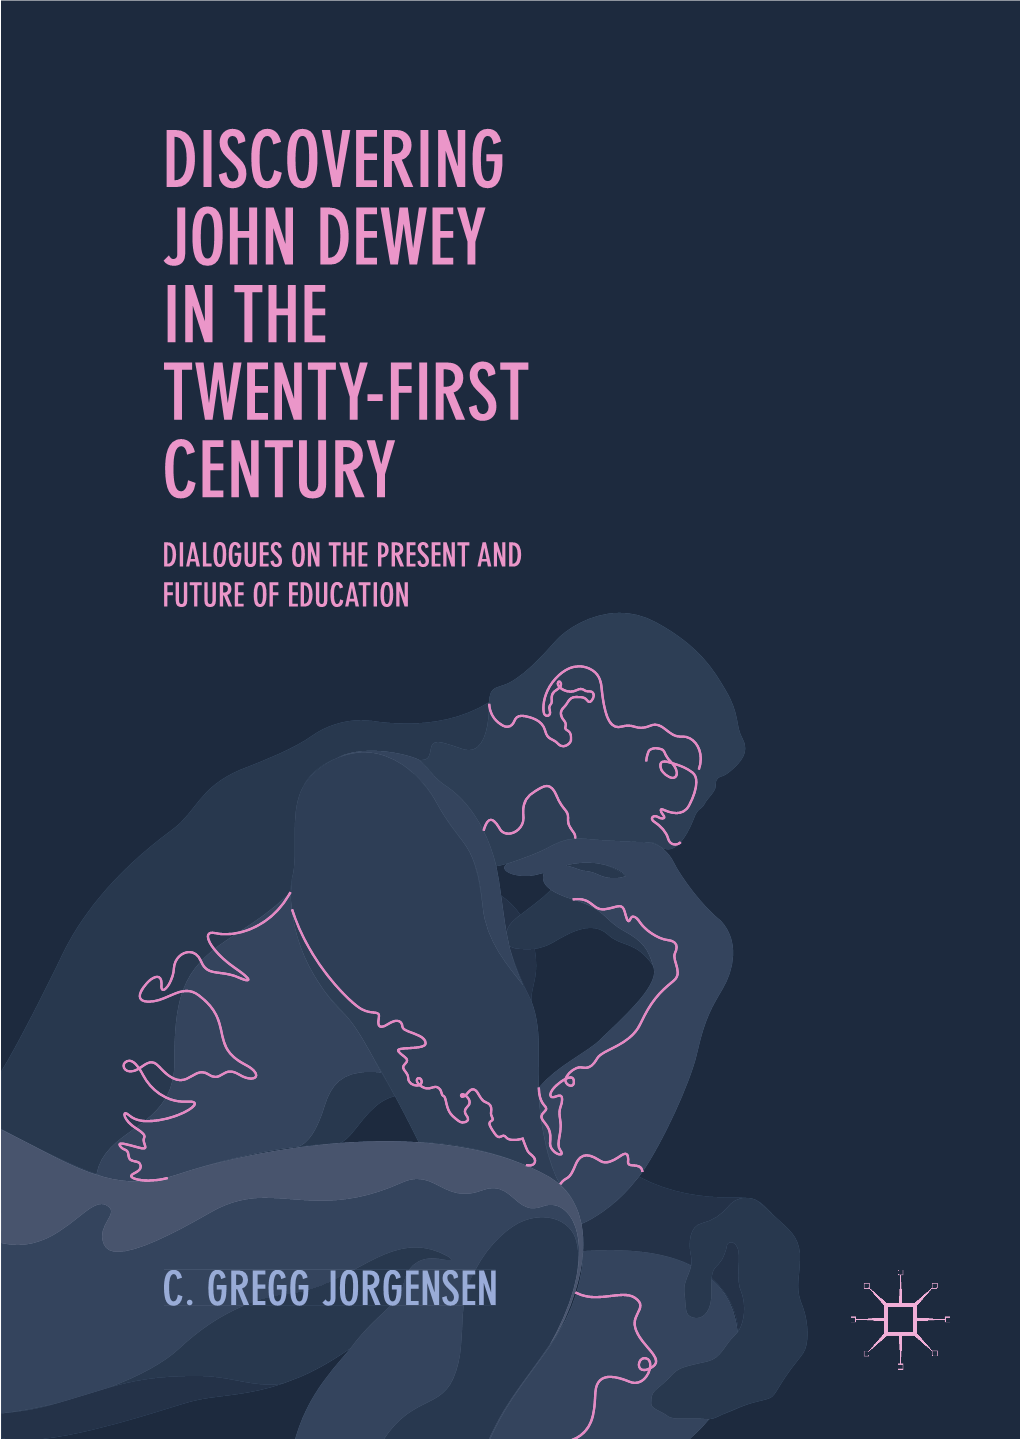 Discovering John Dewey in the Twenty-First Century Dialogues on the Present and Future of Education